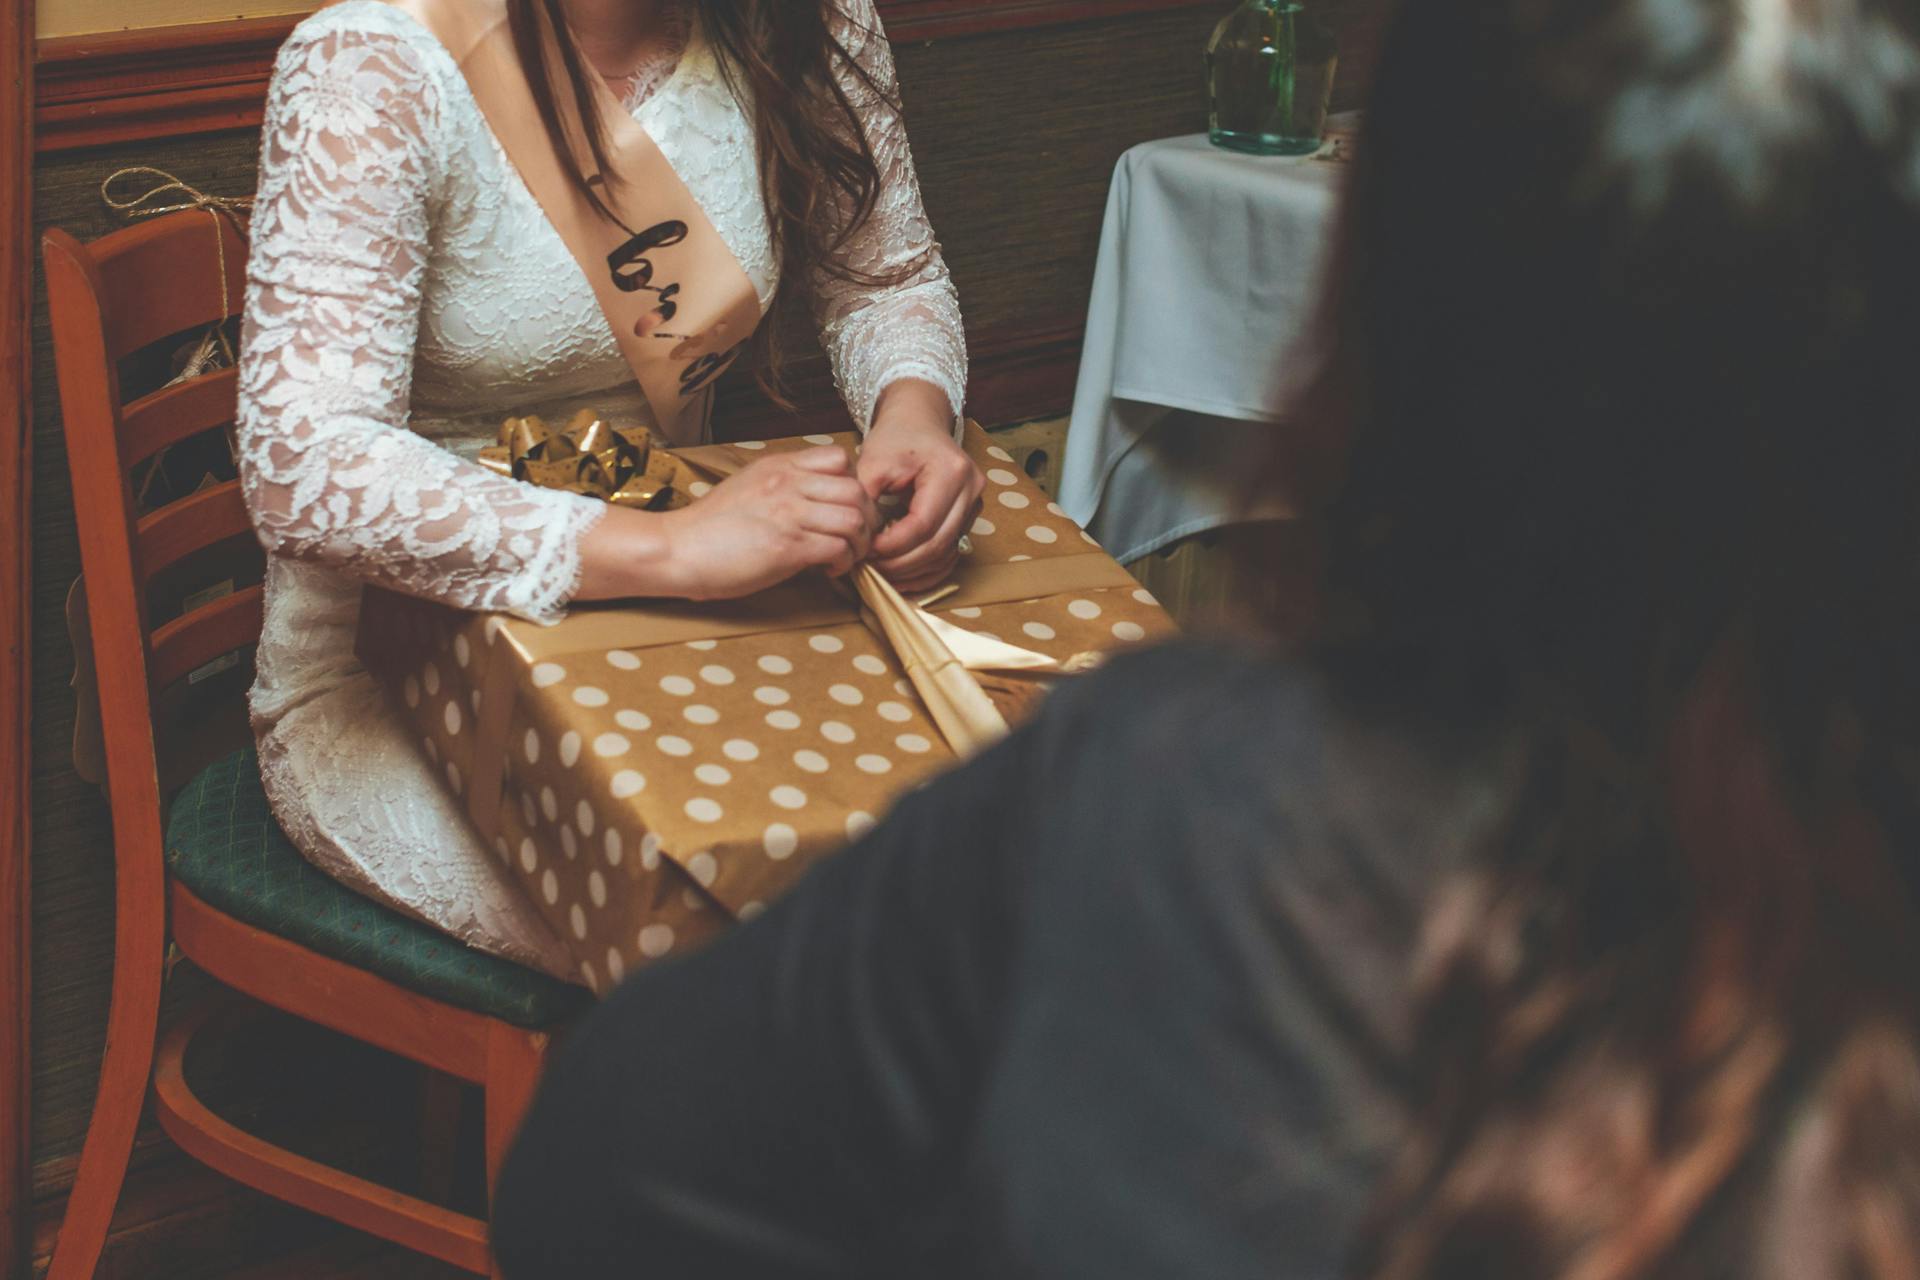 A woman unwrapping her birthday gift | Source: Pexels